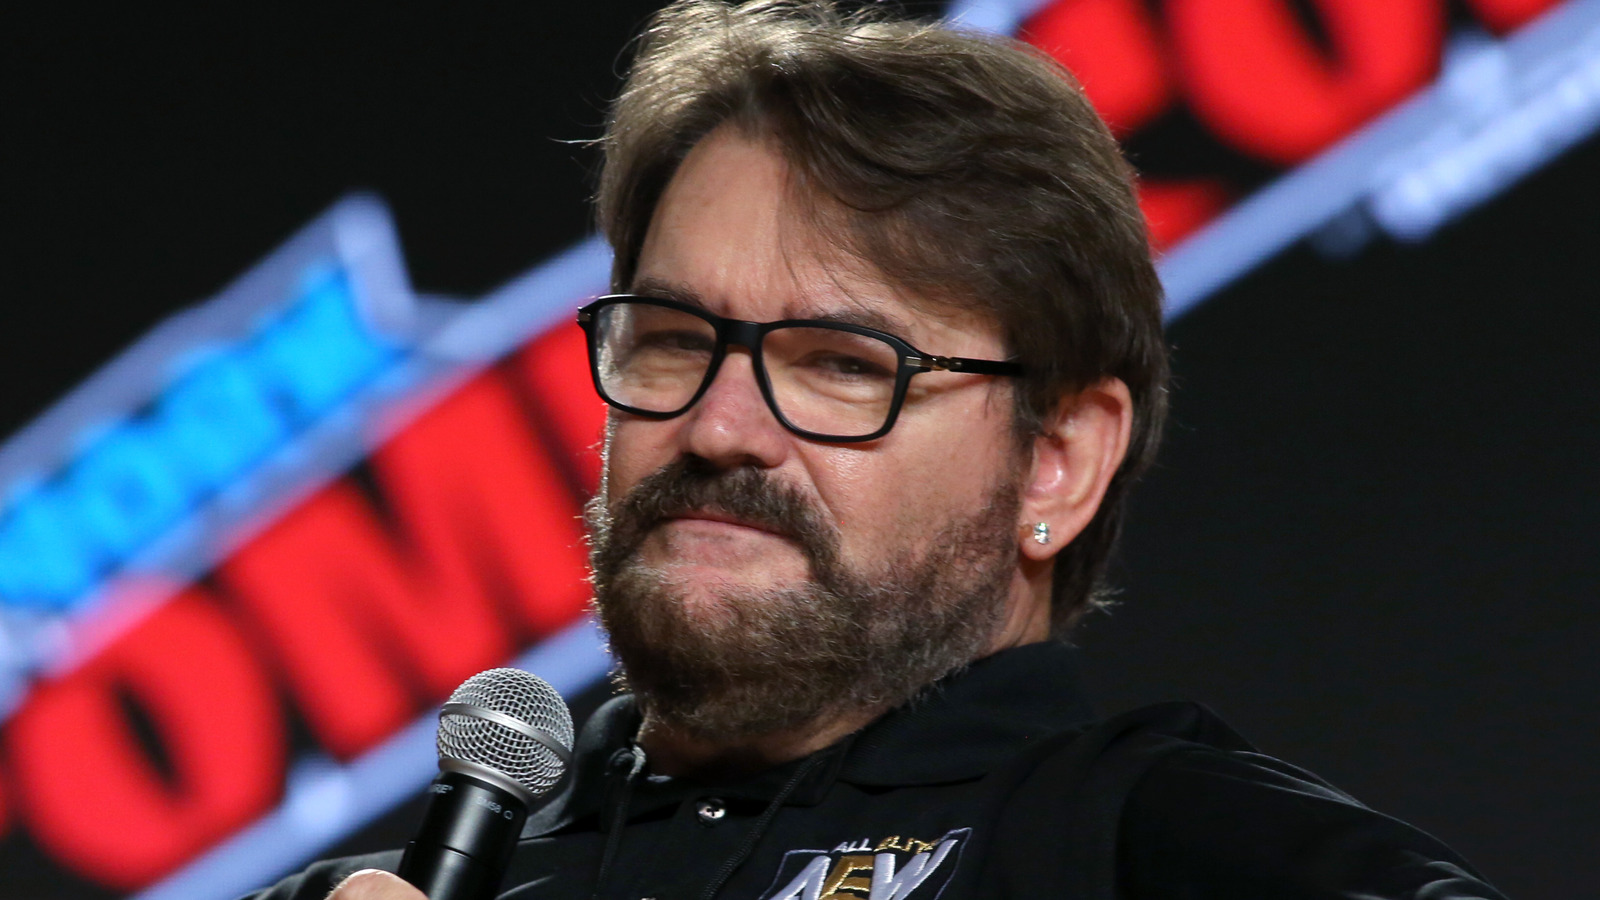 Tony Schiavone Explains What He Thinks Is The Problem With Modern Wrestlers